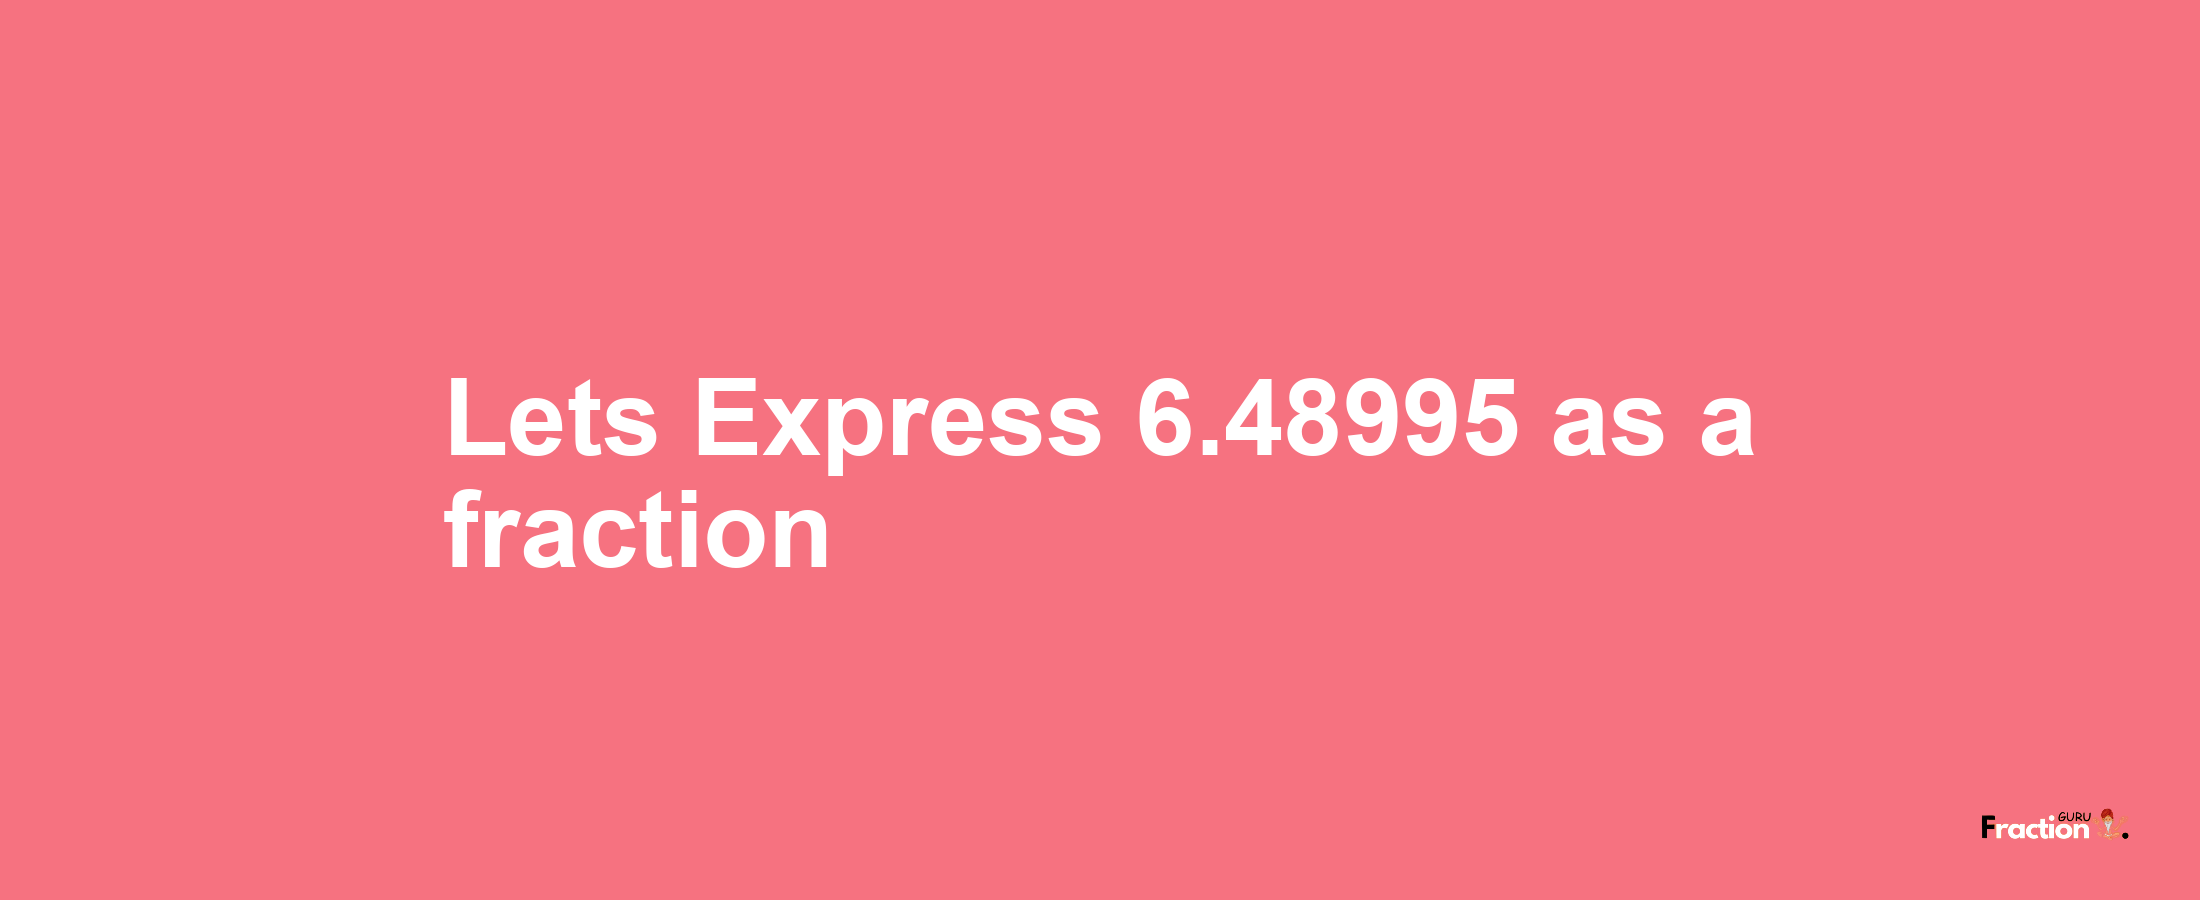 Lets Express 6.48995 as afraction